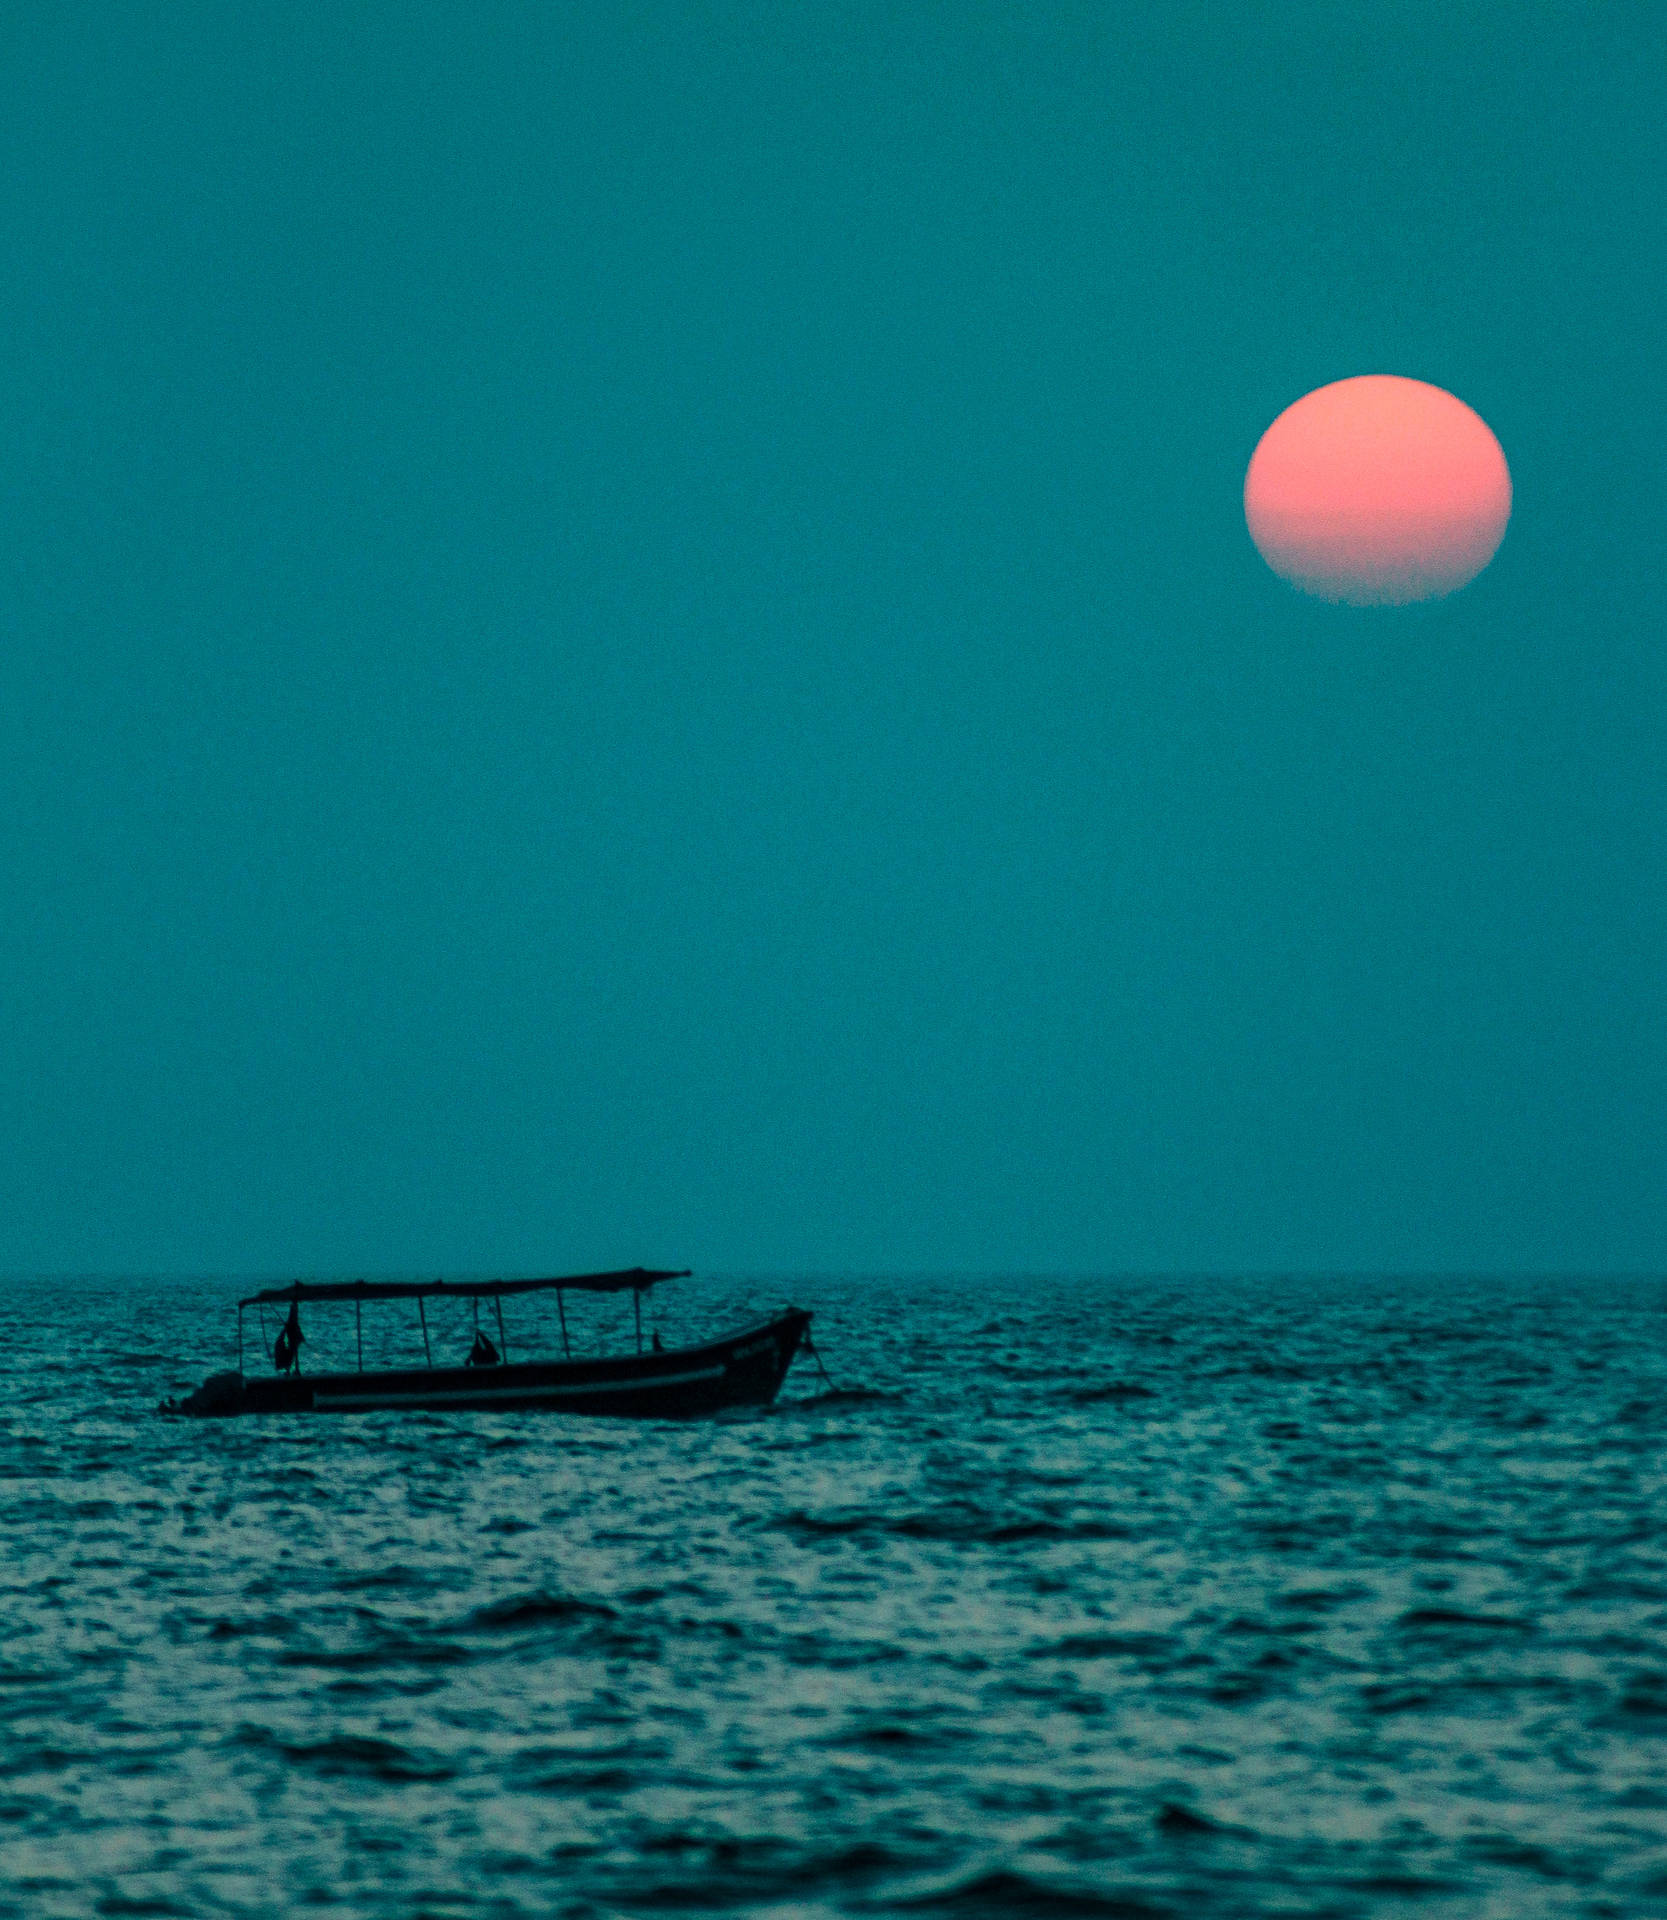 Teal Ocean And Pink Moon Background